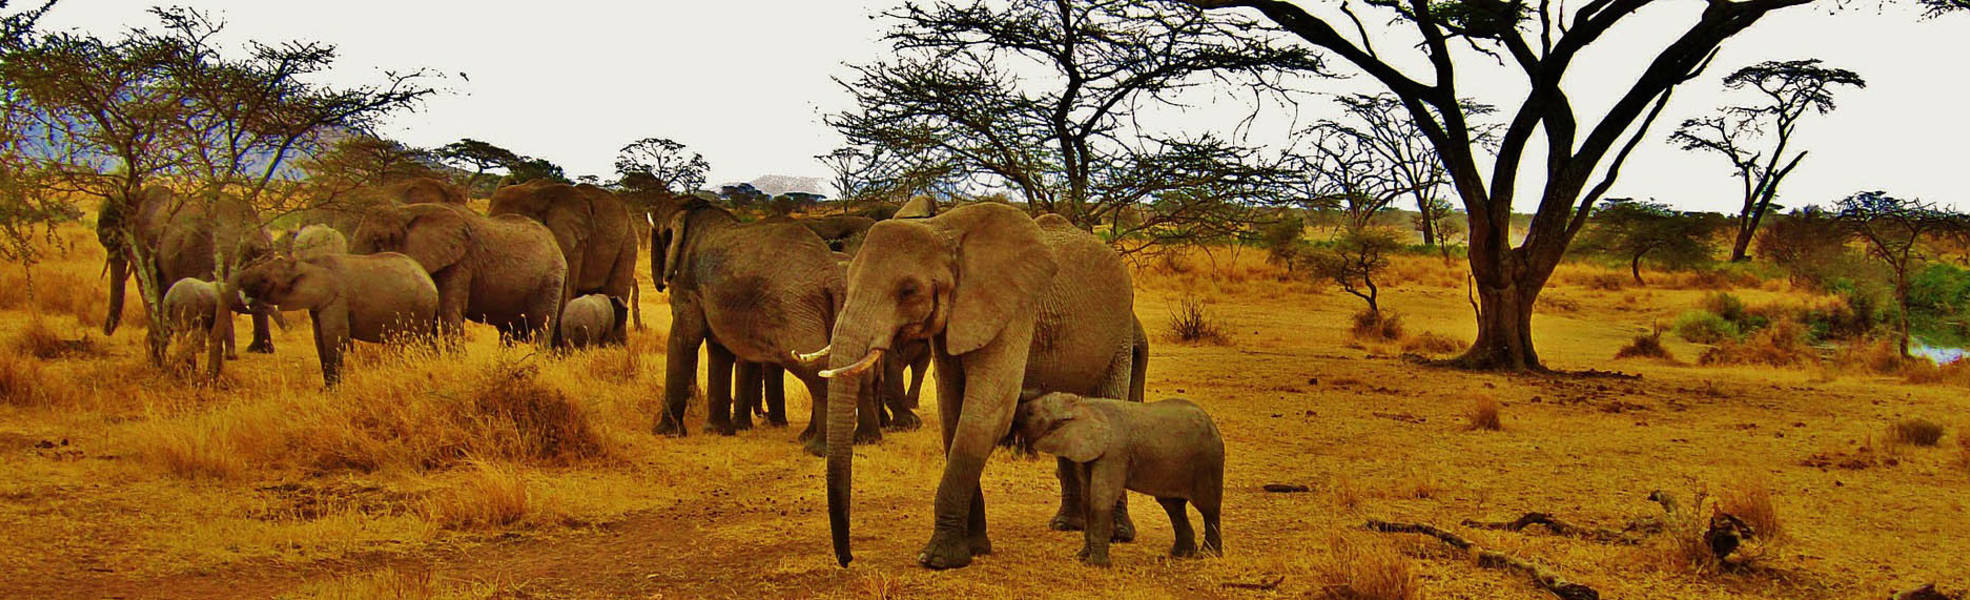 Elephants in the national park